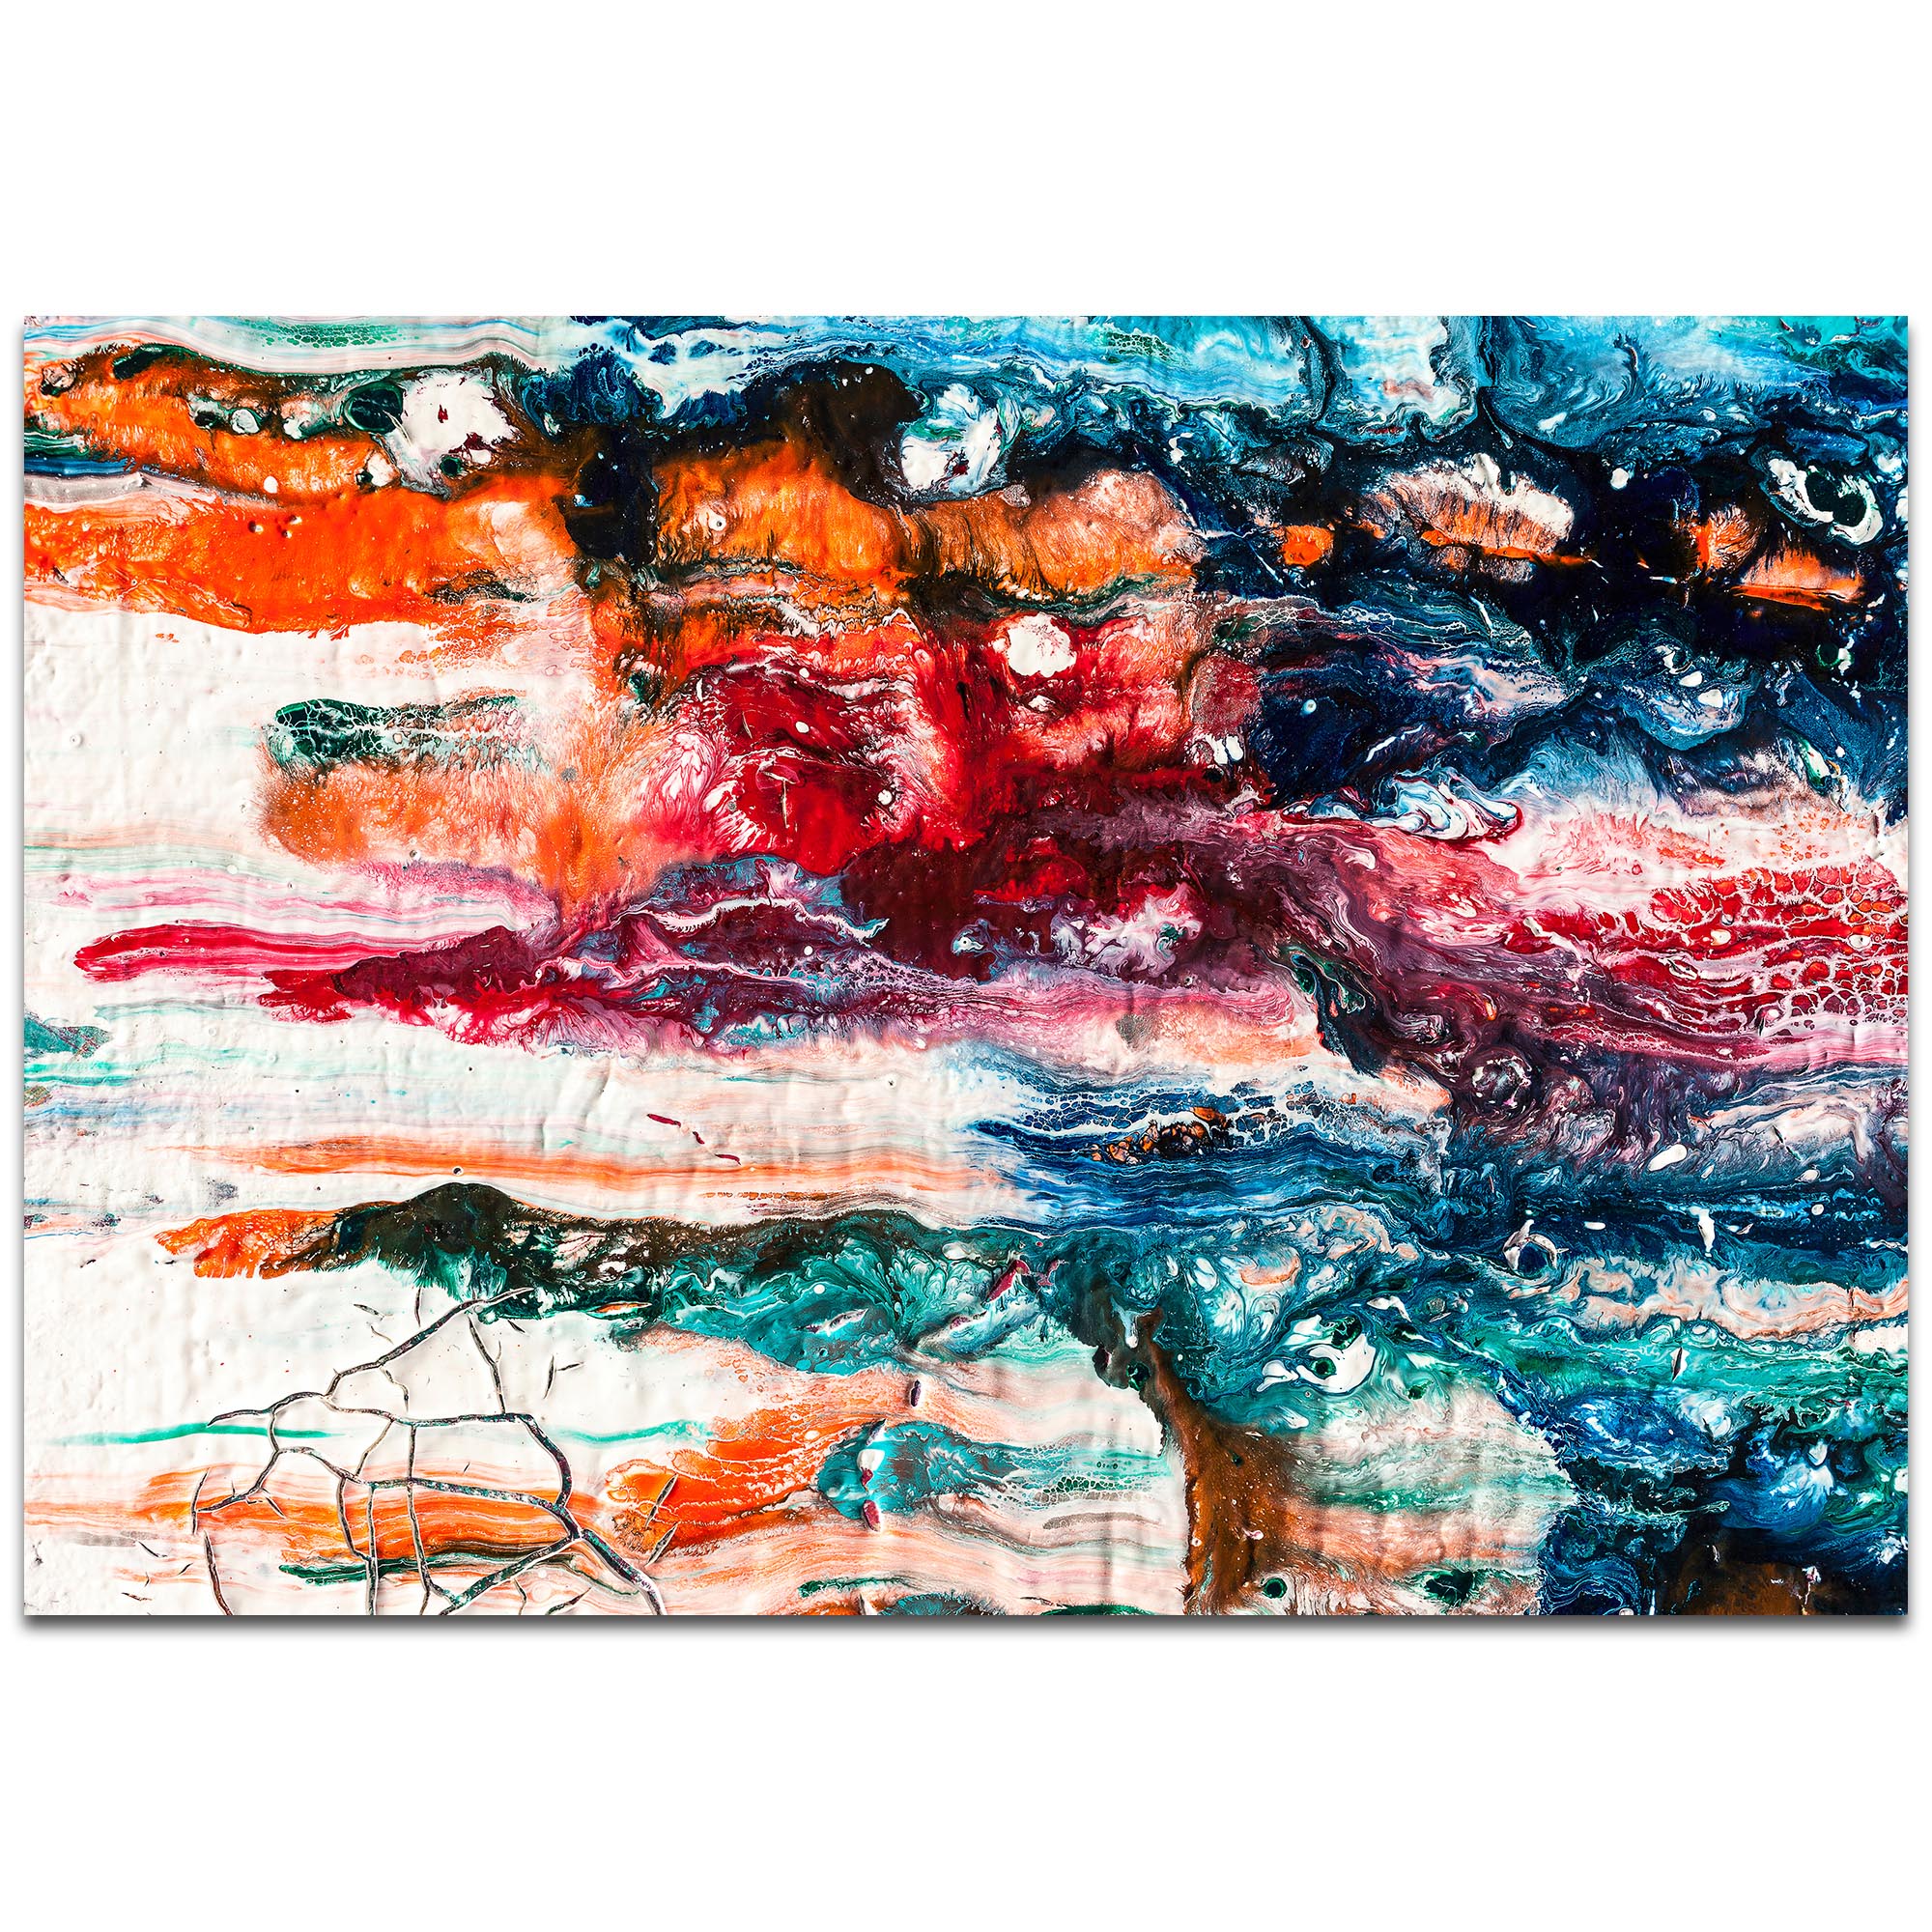 Abstract Wall Art 'Sunset On Her Breath 3' - Colorful Urban Decor on Metal or Plexiglass